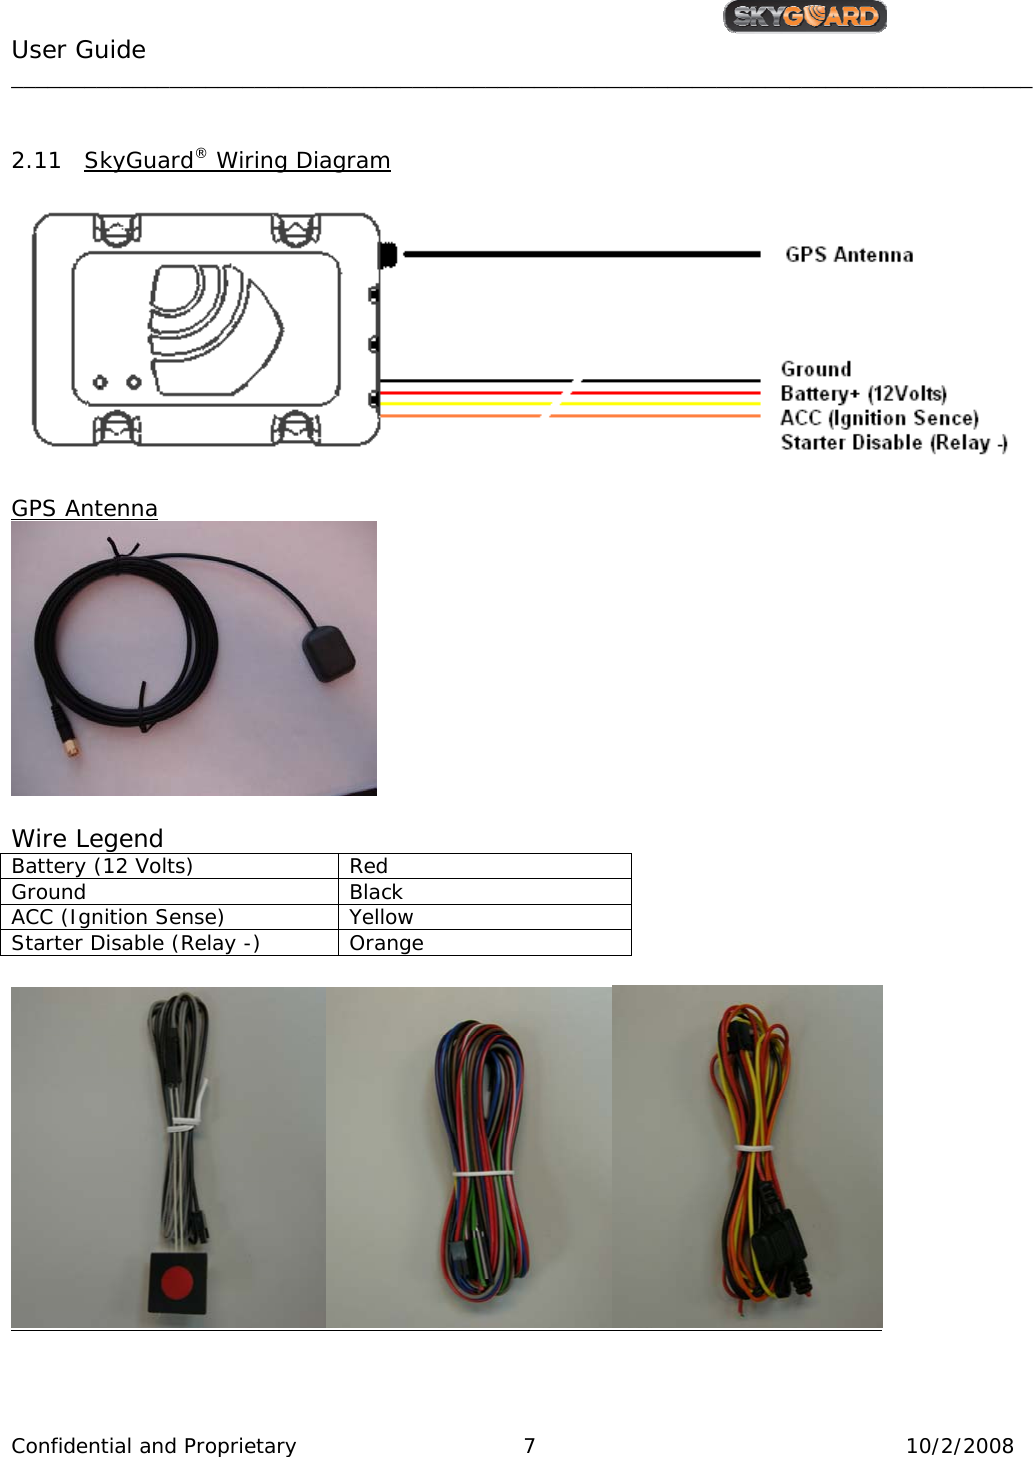                                                   User Guide                                         ____________________________________________________________________________________ Confidential and Proprietary     7  10/2/2008   2.11 SkyGuard® Wiring Diagram   GPS Antenna   Wire Legend Battery (12 Volts)  Red  Ground Black ACC (Ignition Sense)  Yellow Starter Disable (Relay -)  Orange    